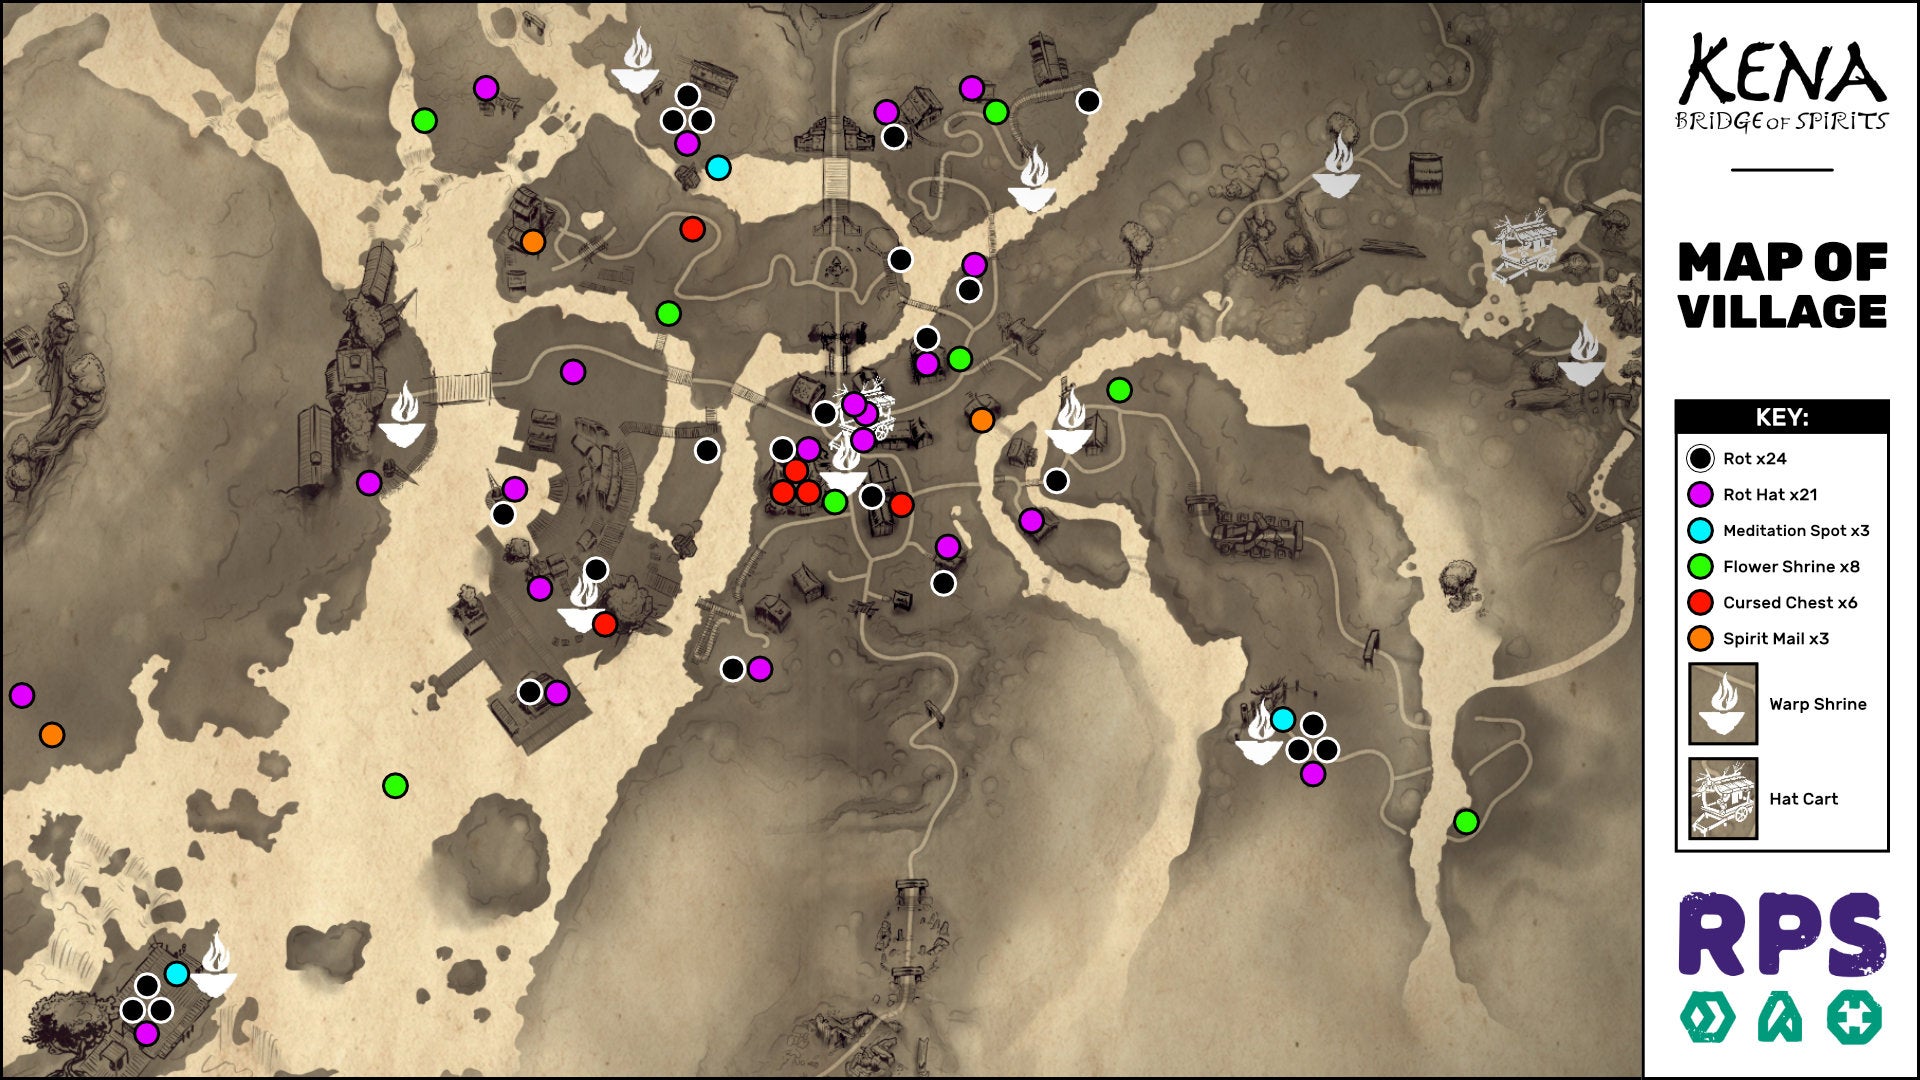 A map of the Village area of Kena: Bridge Of Spirits with all collectible locations marked.